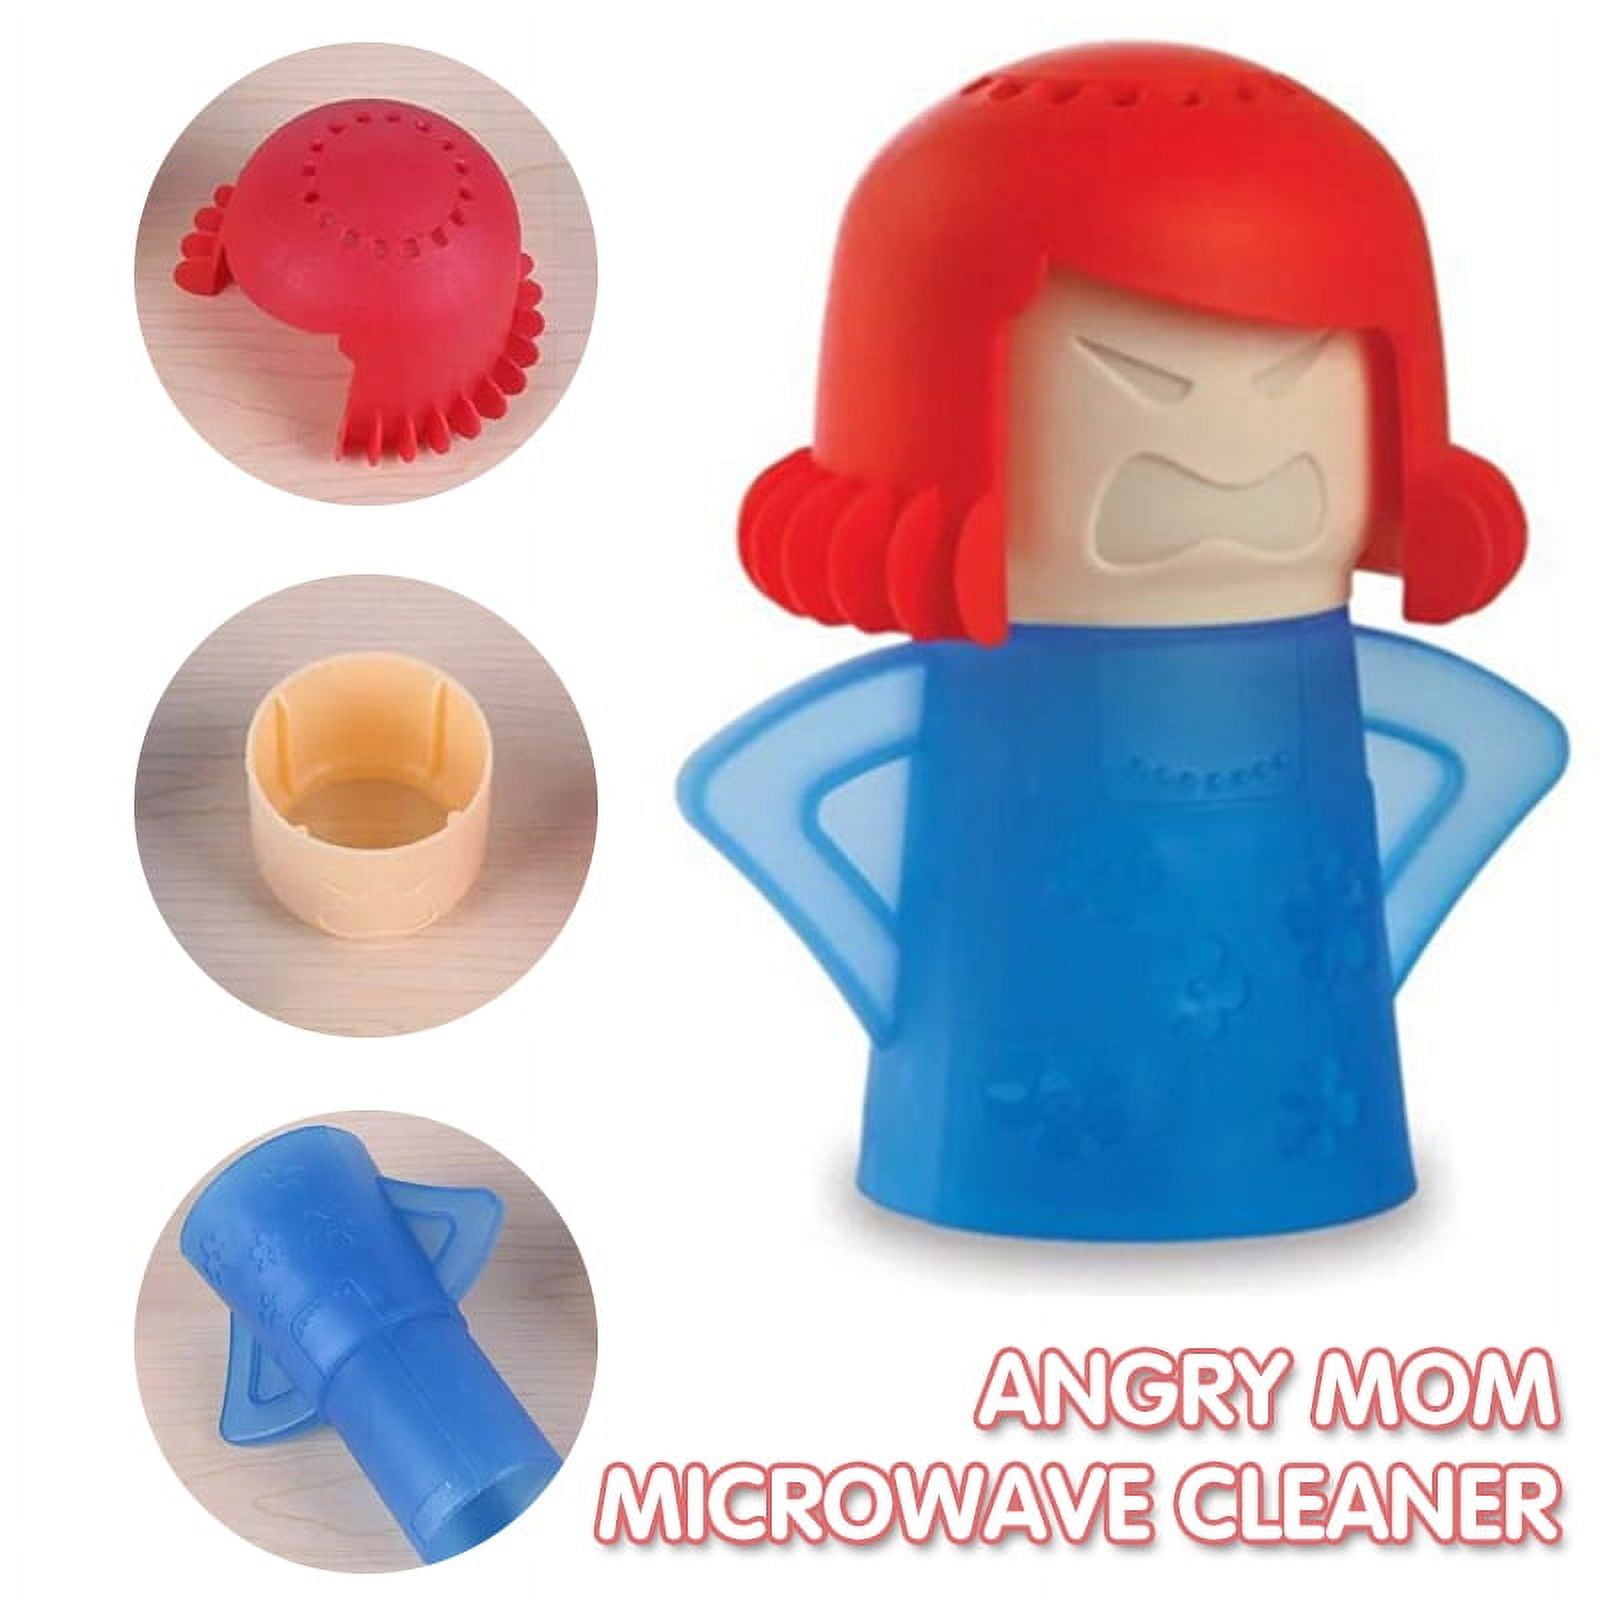 PENGXIANG Angry Mama Microwave Cleaner - Microwave Oven Steam Cleaner,  Angry Mom High Temperature Steamer Cleaning Equipment Easily Crud in  Minutes Steam Cleans with Vinegar&Water for Kitchen 